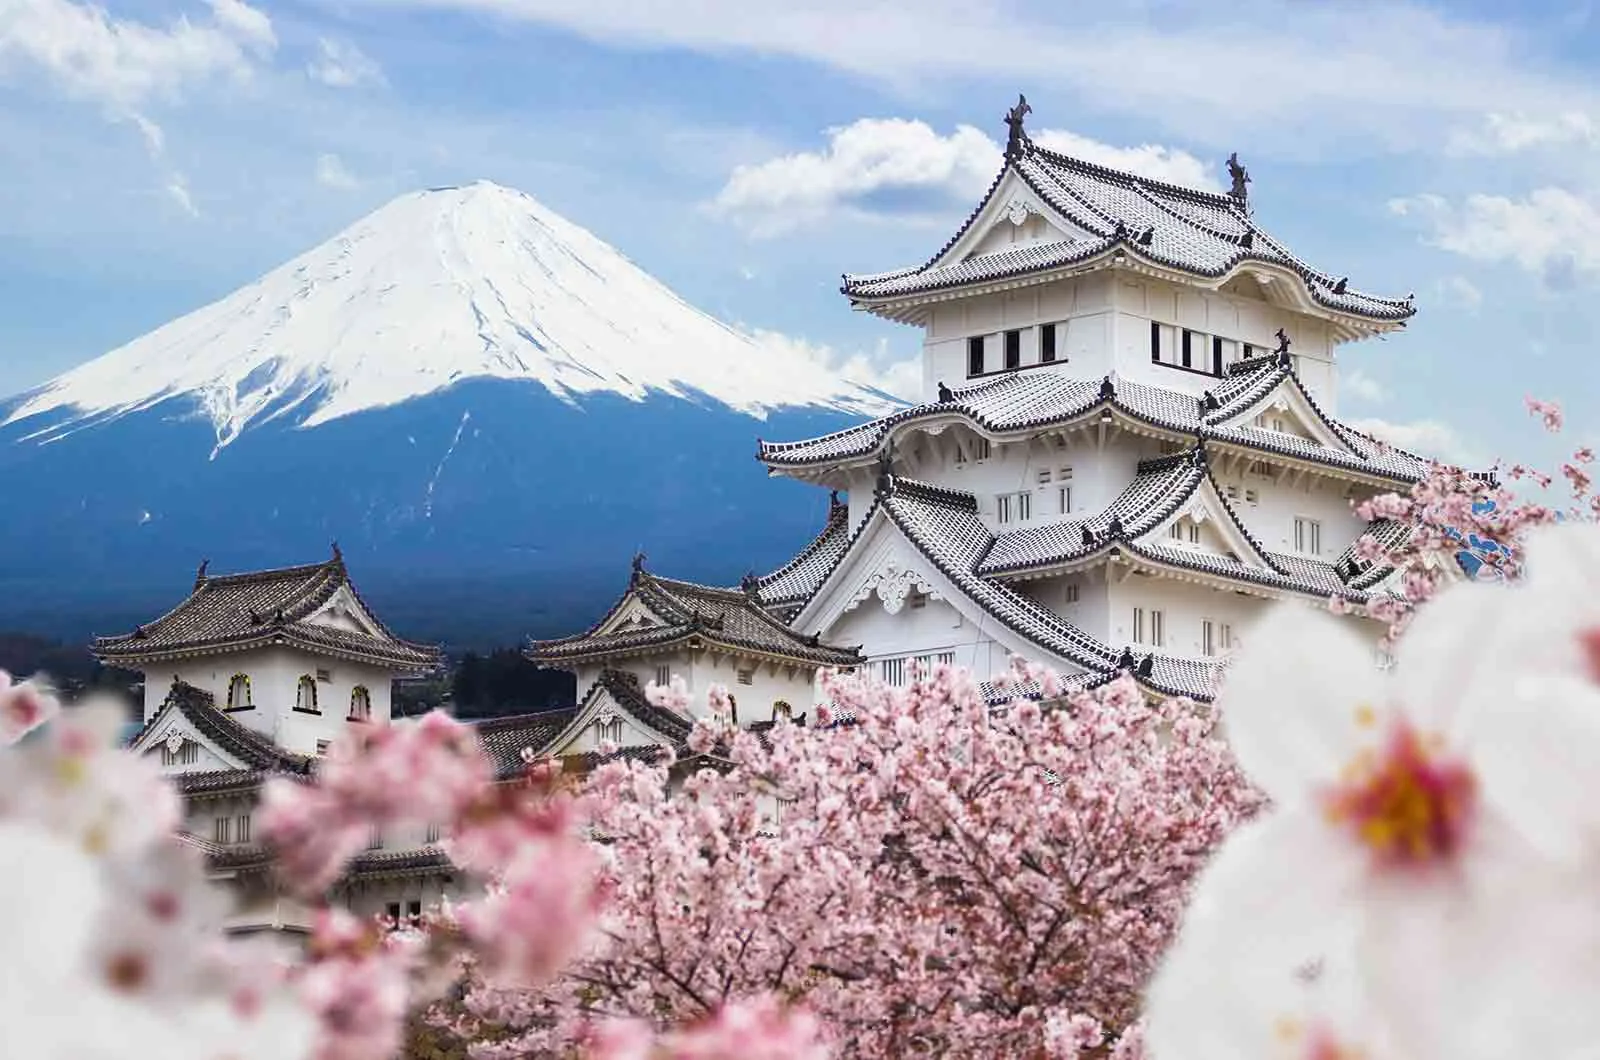 Beautiful view of Himeji Castle among the white mountains in Japan. Concept of Japanese translation service.